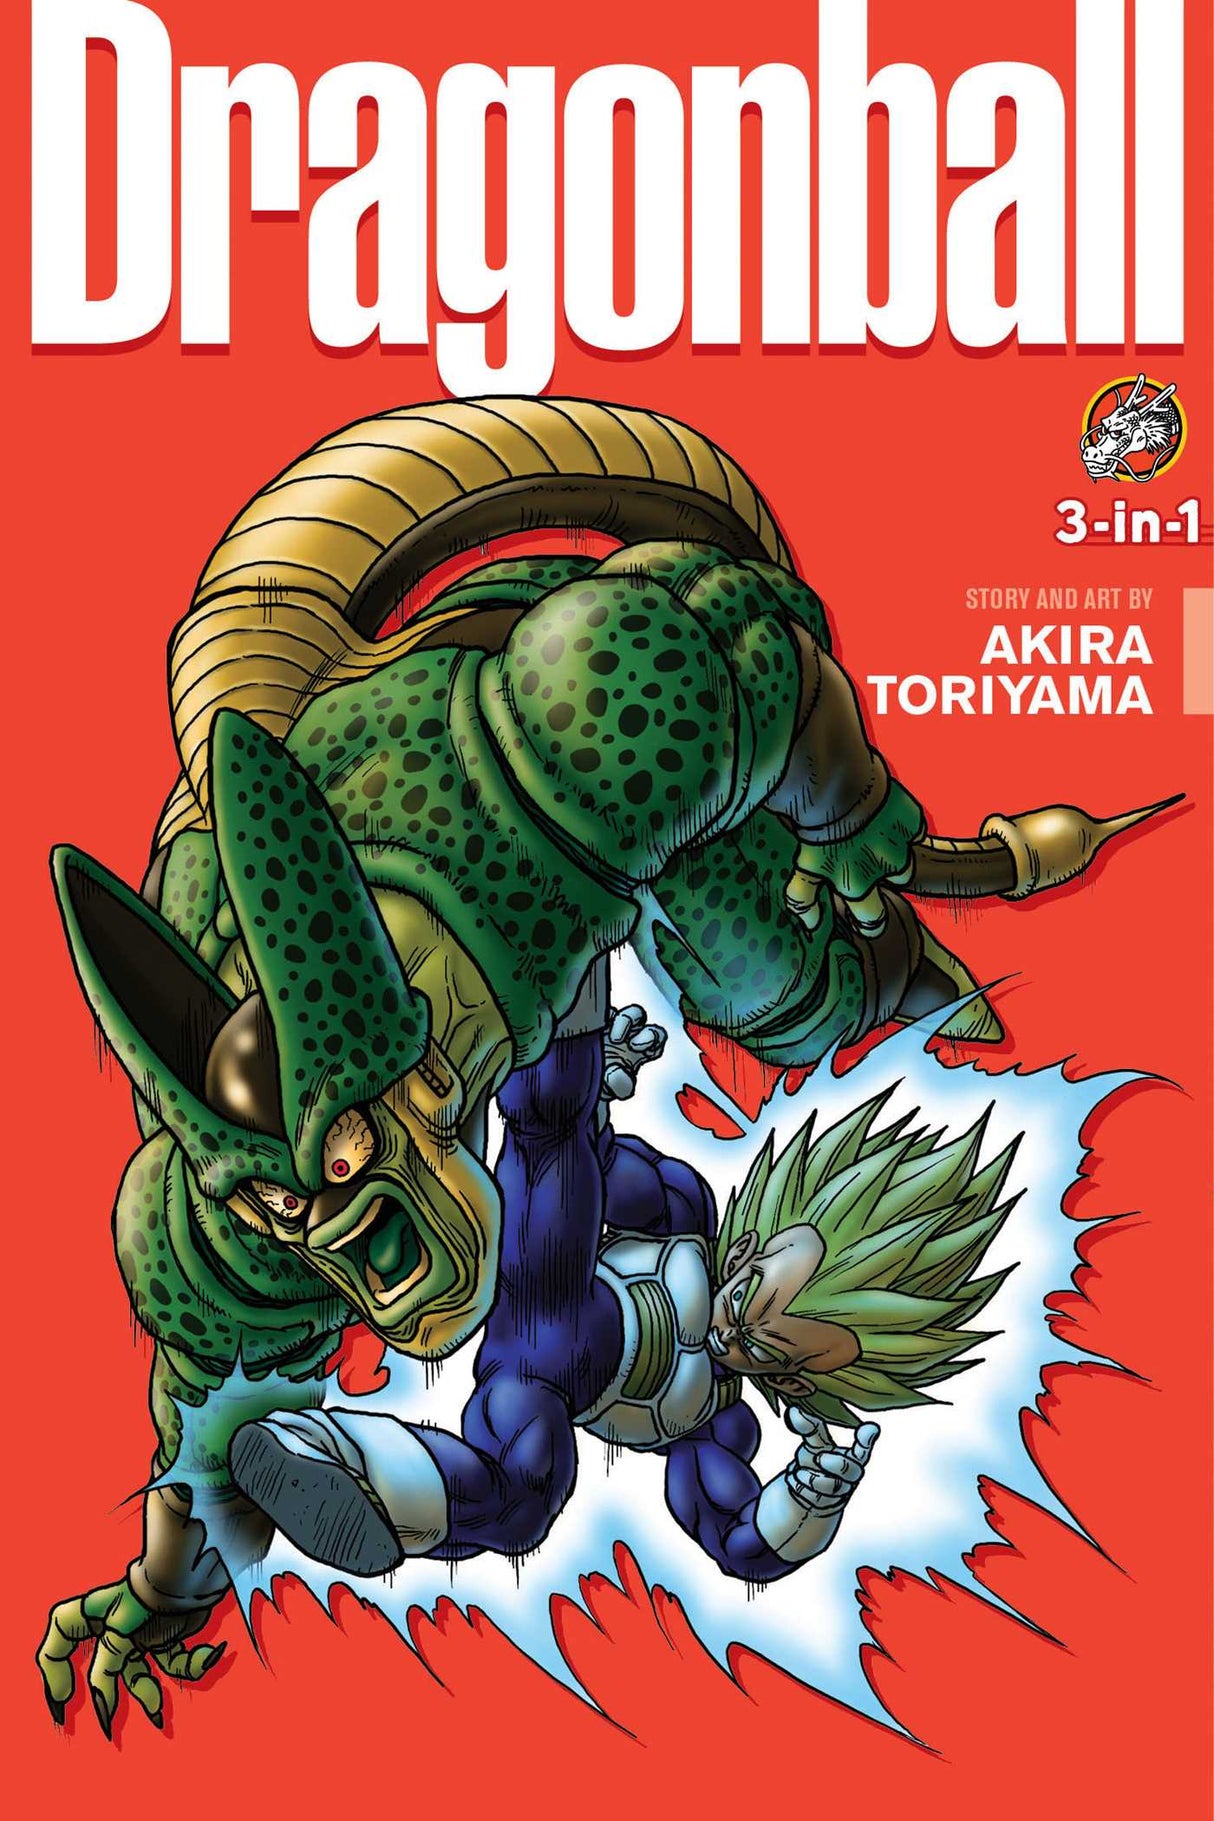 Cover image of the Manga Dragon Ball (3-in-1 Edition), Vol. 11: Includes vols. 31, 32 & 33